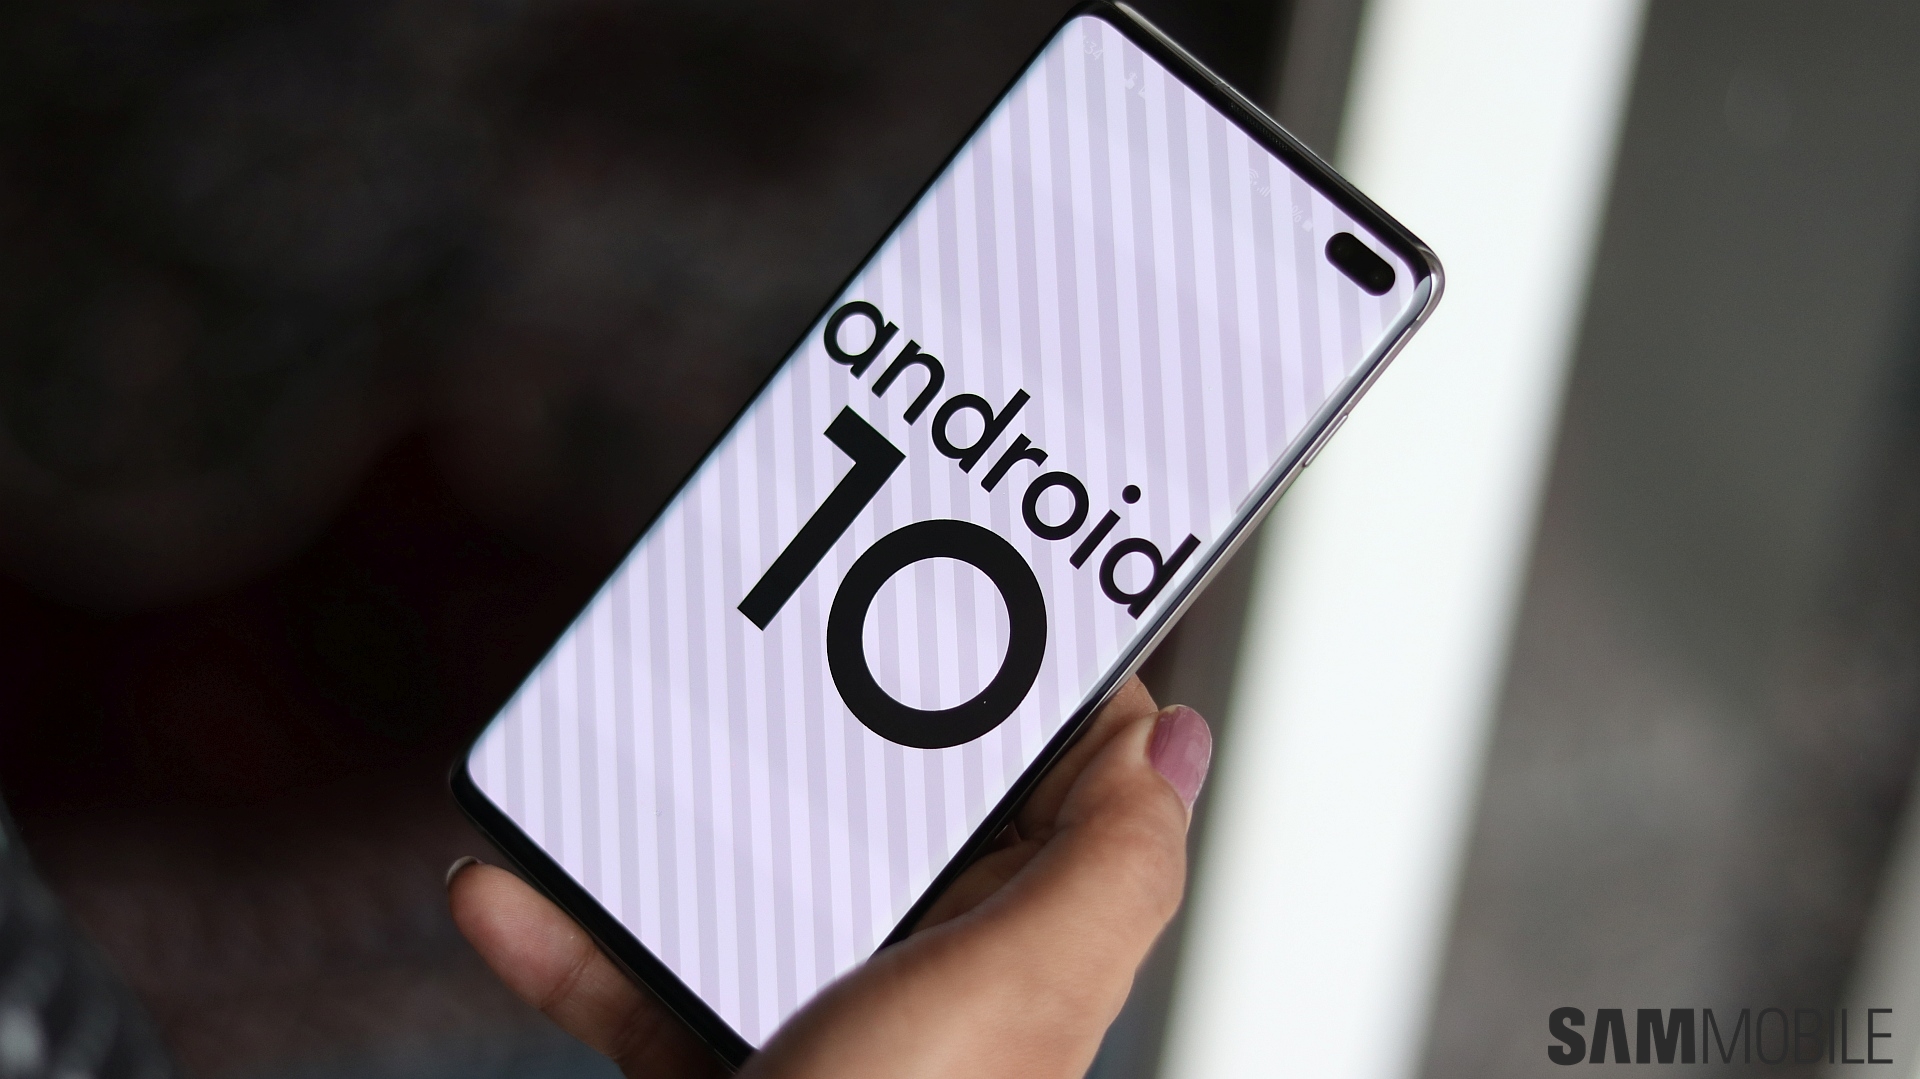 Innocent Easy to read commonplace Galaxy S10, Note 10 One UI 2.1 update widely available, grab it now! -  SamMobile